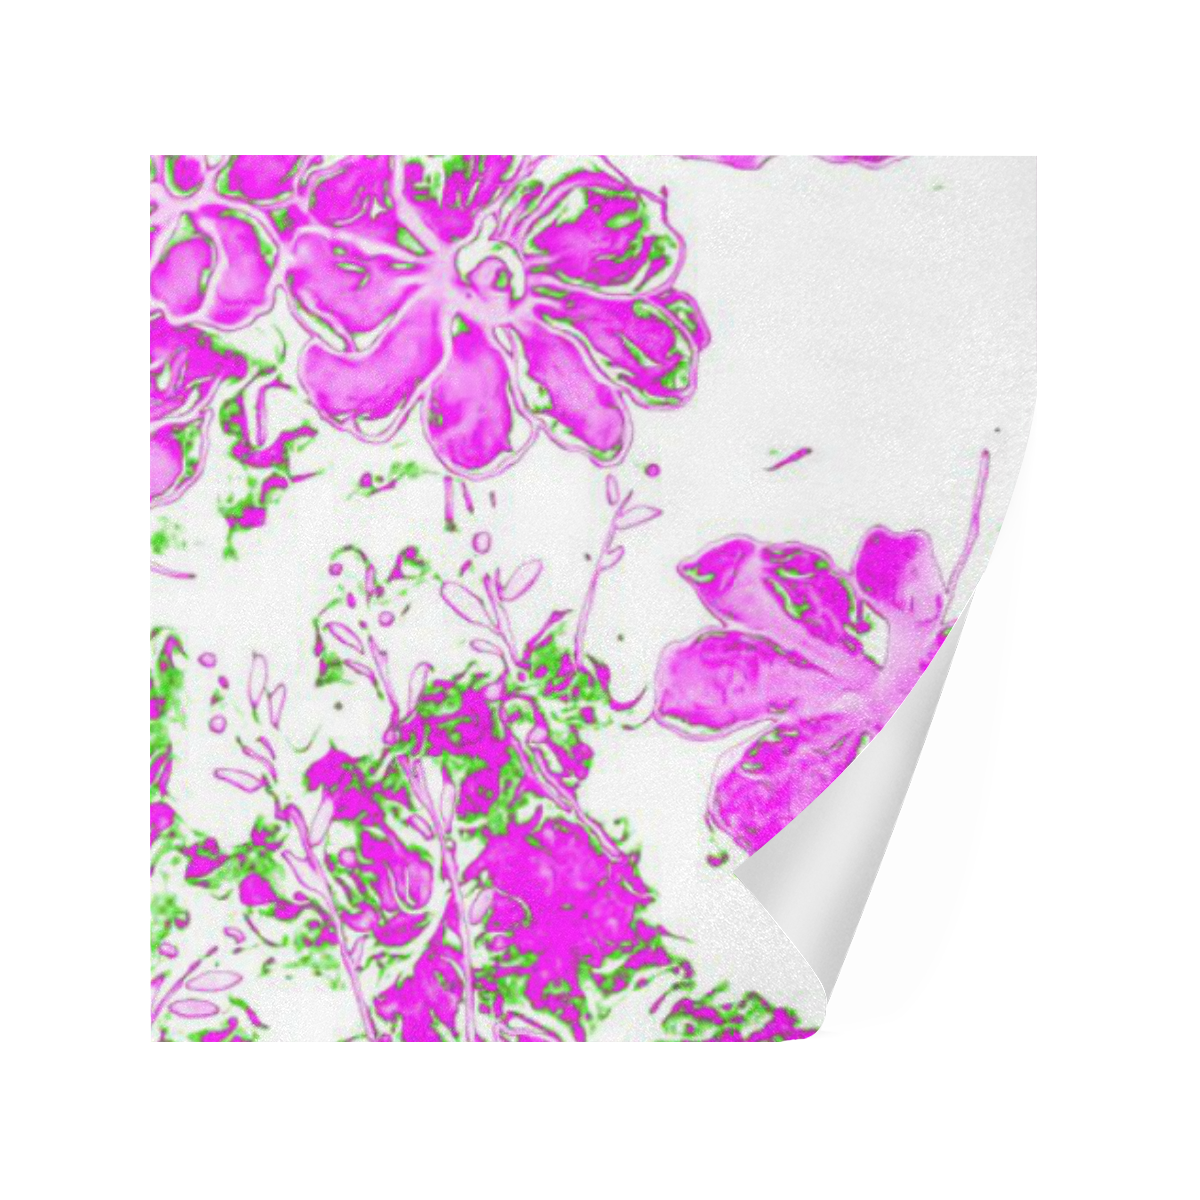 floral dreams 12 F by JamColors Gift Wrapping Paper 58"x 23" (2 Rolls)